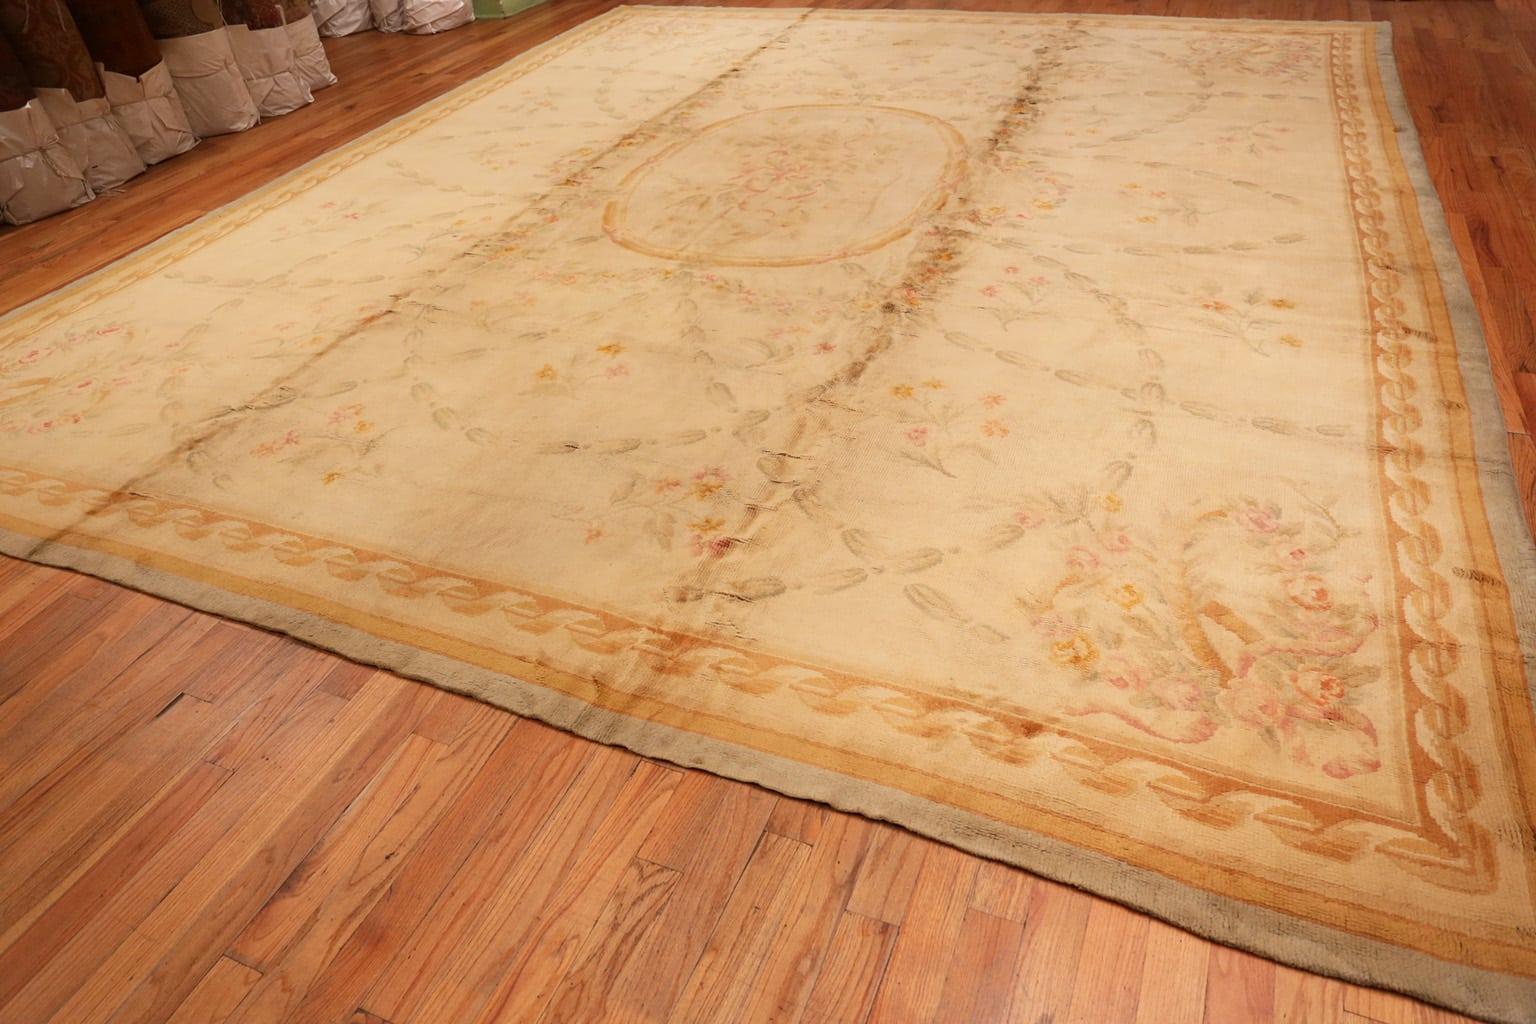 Large Floral Antique Savonnerie French Rug. Size: 14 ft x 17 ft 2